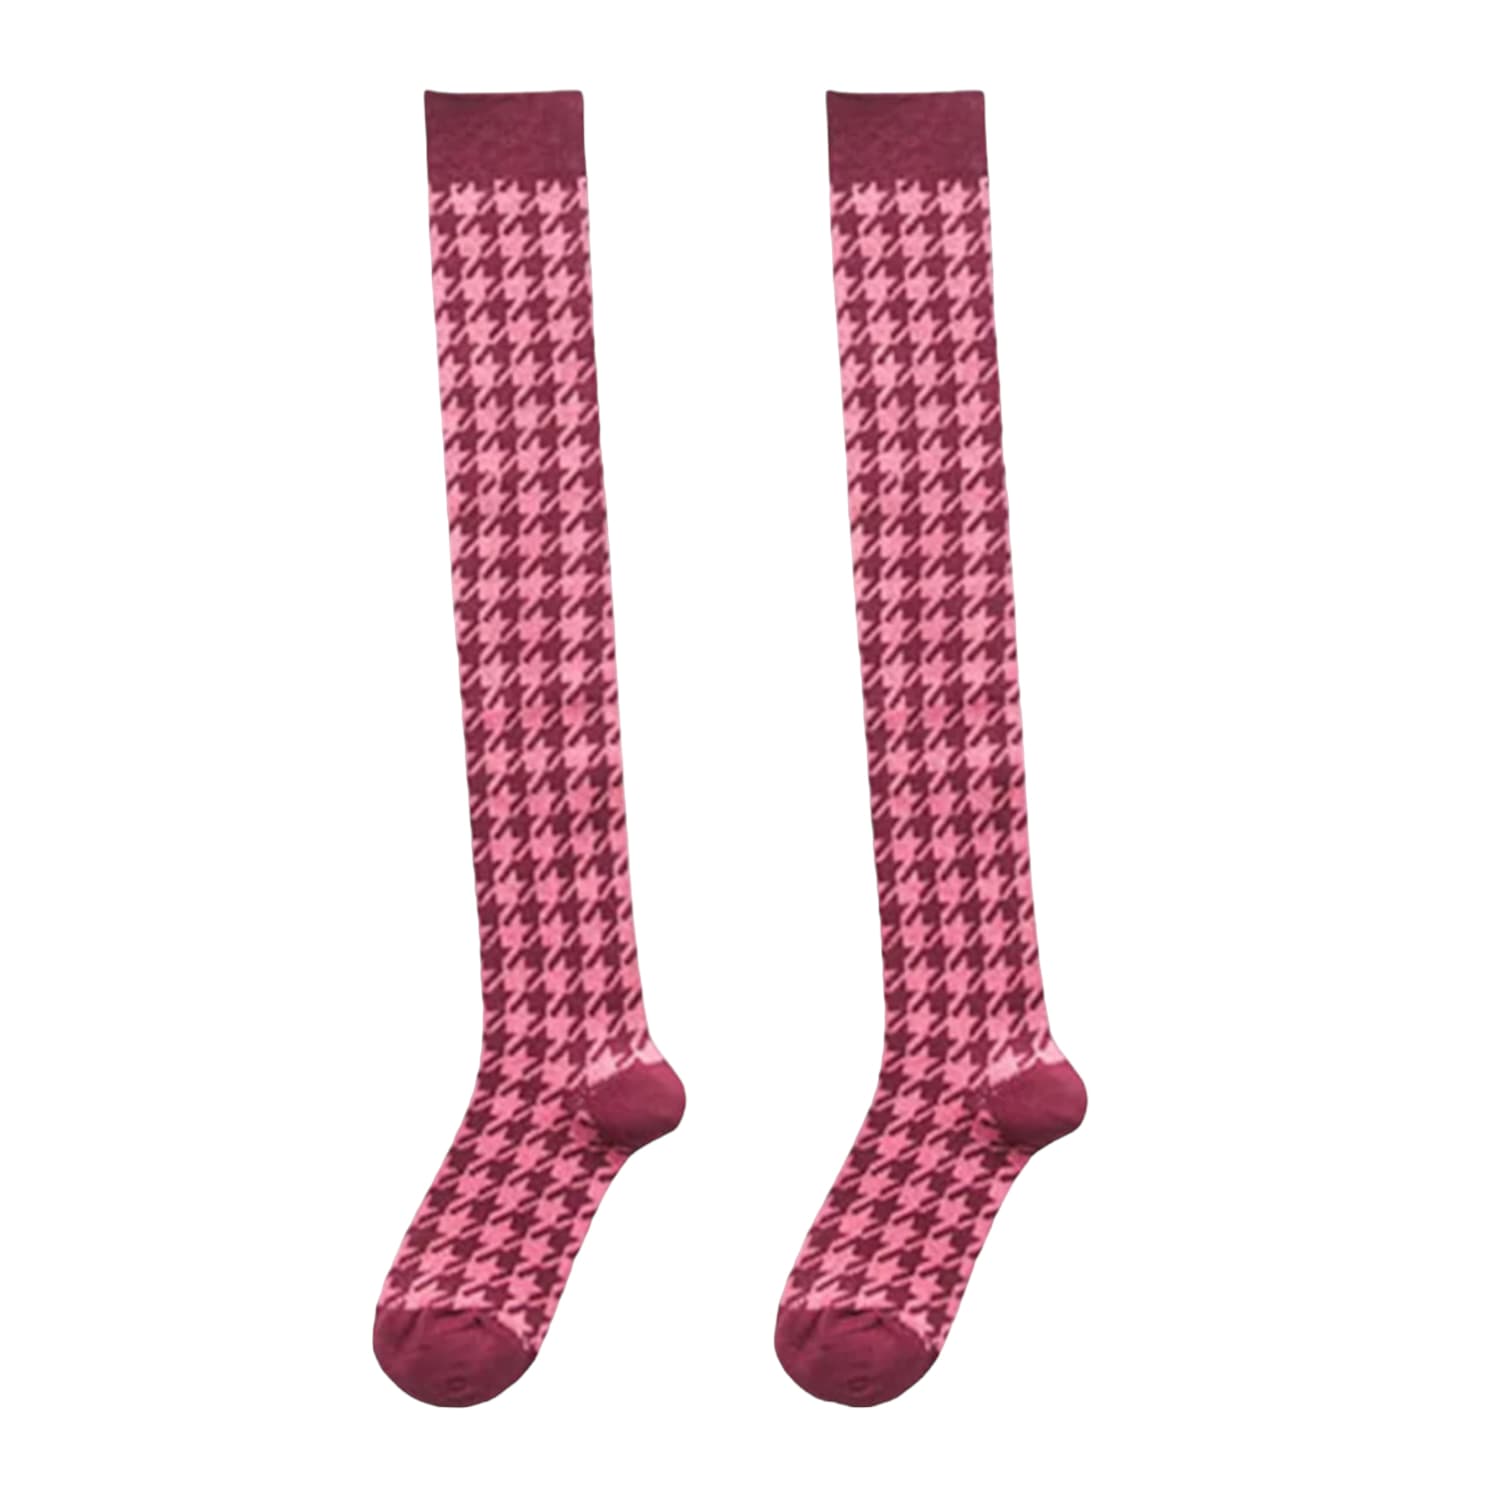 Pilates Grip Socks - Two Pack - Ballet Pink & Blush by High Heel Jungle by  Kathryn Eisman